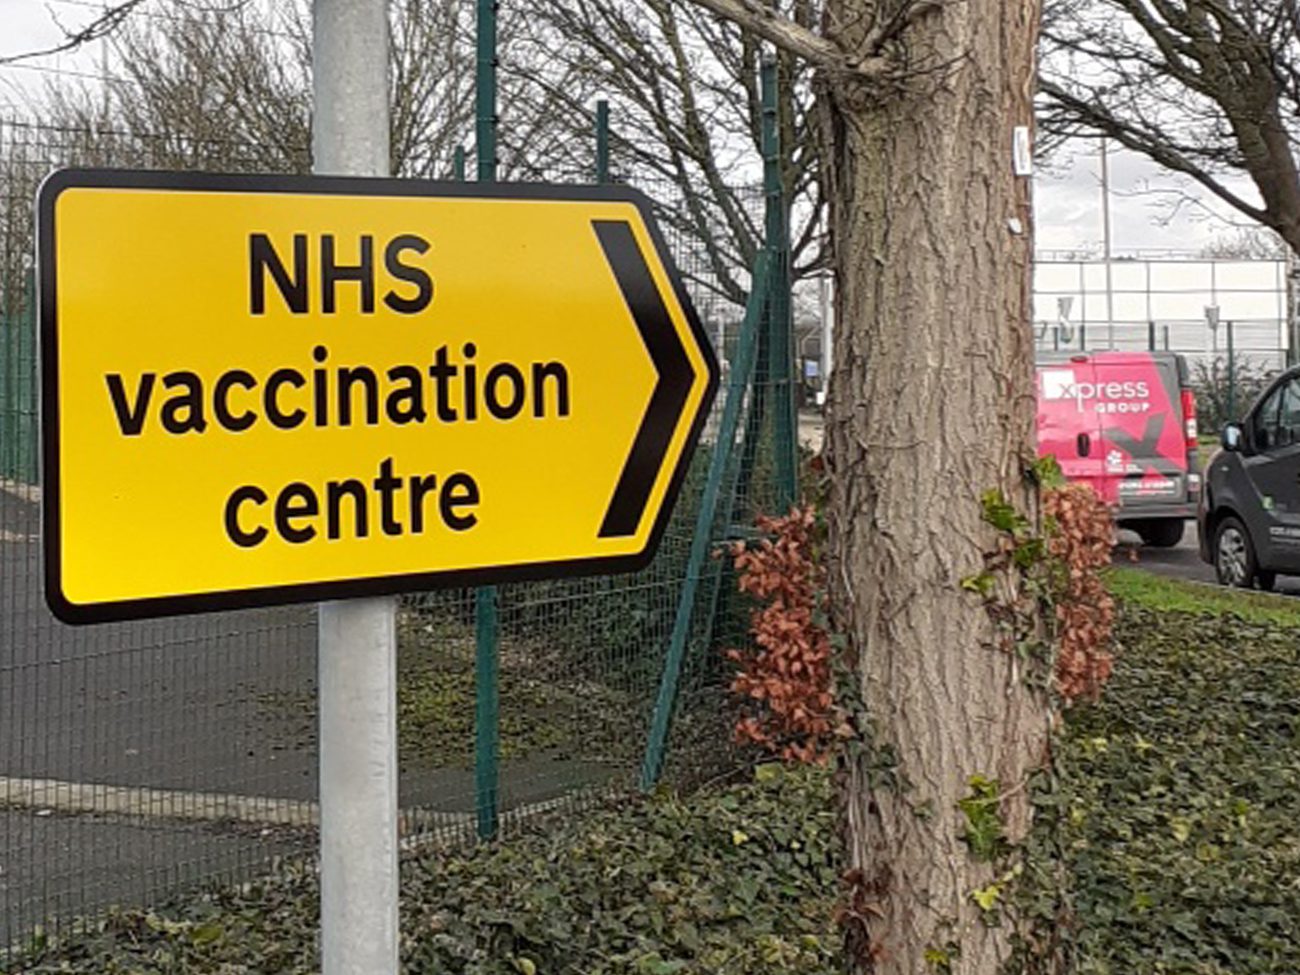 NHS Vaccination Centre road signage